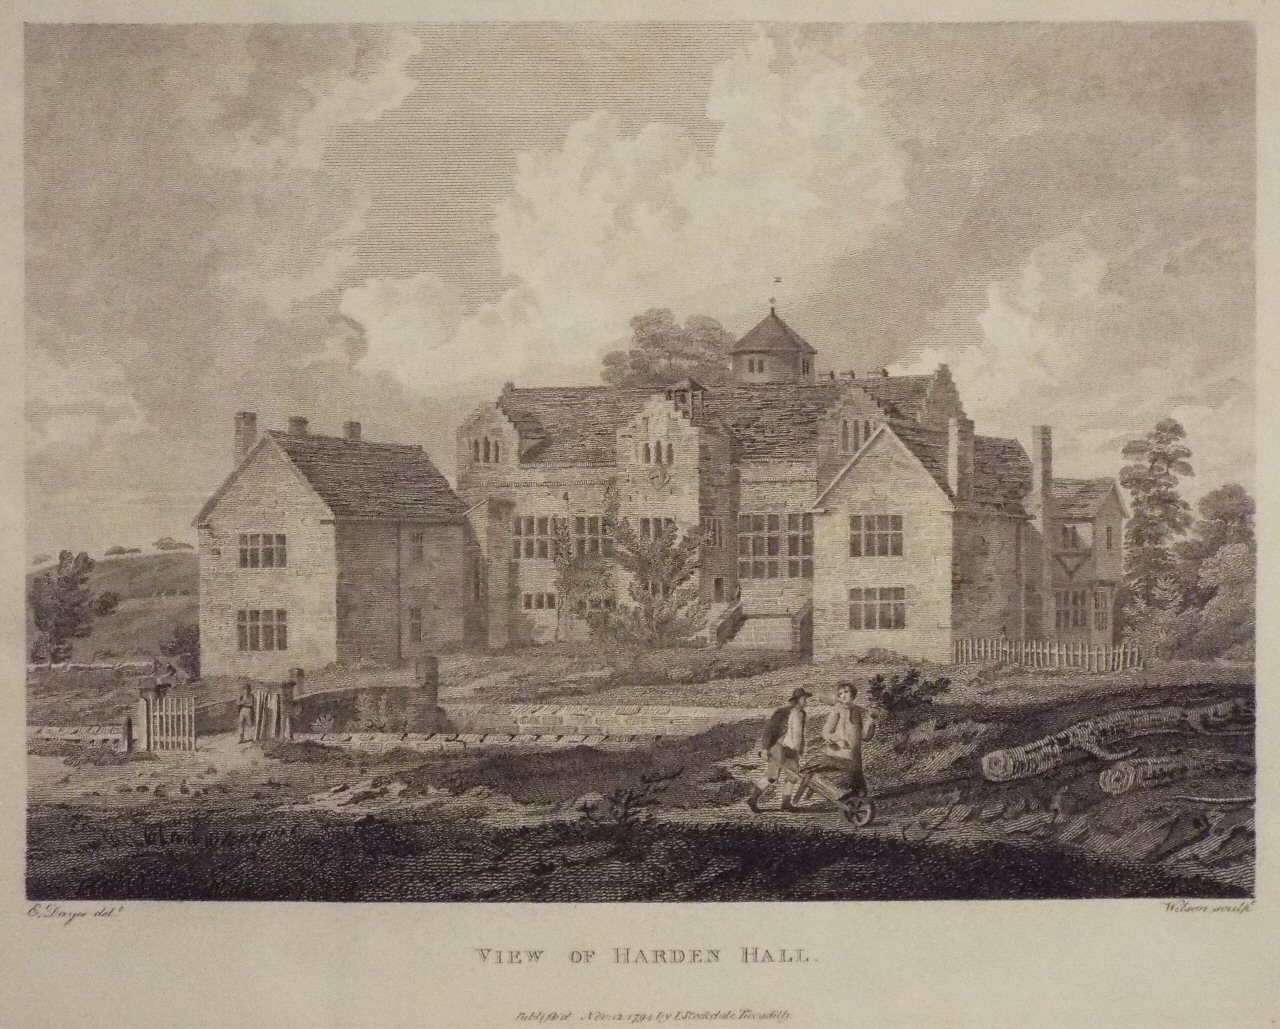 Print - View of Harden Hall. - 